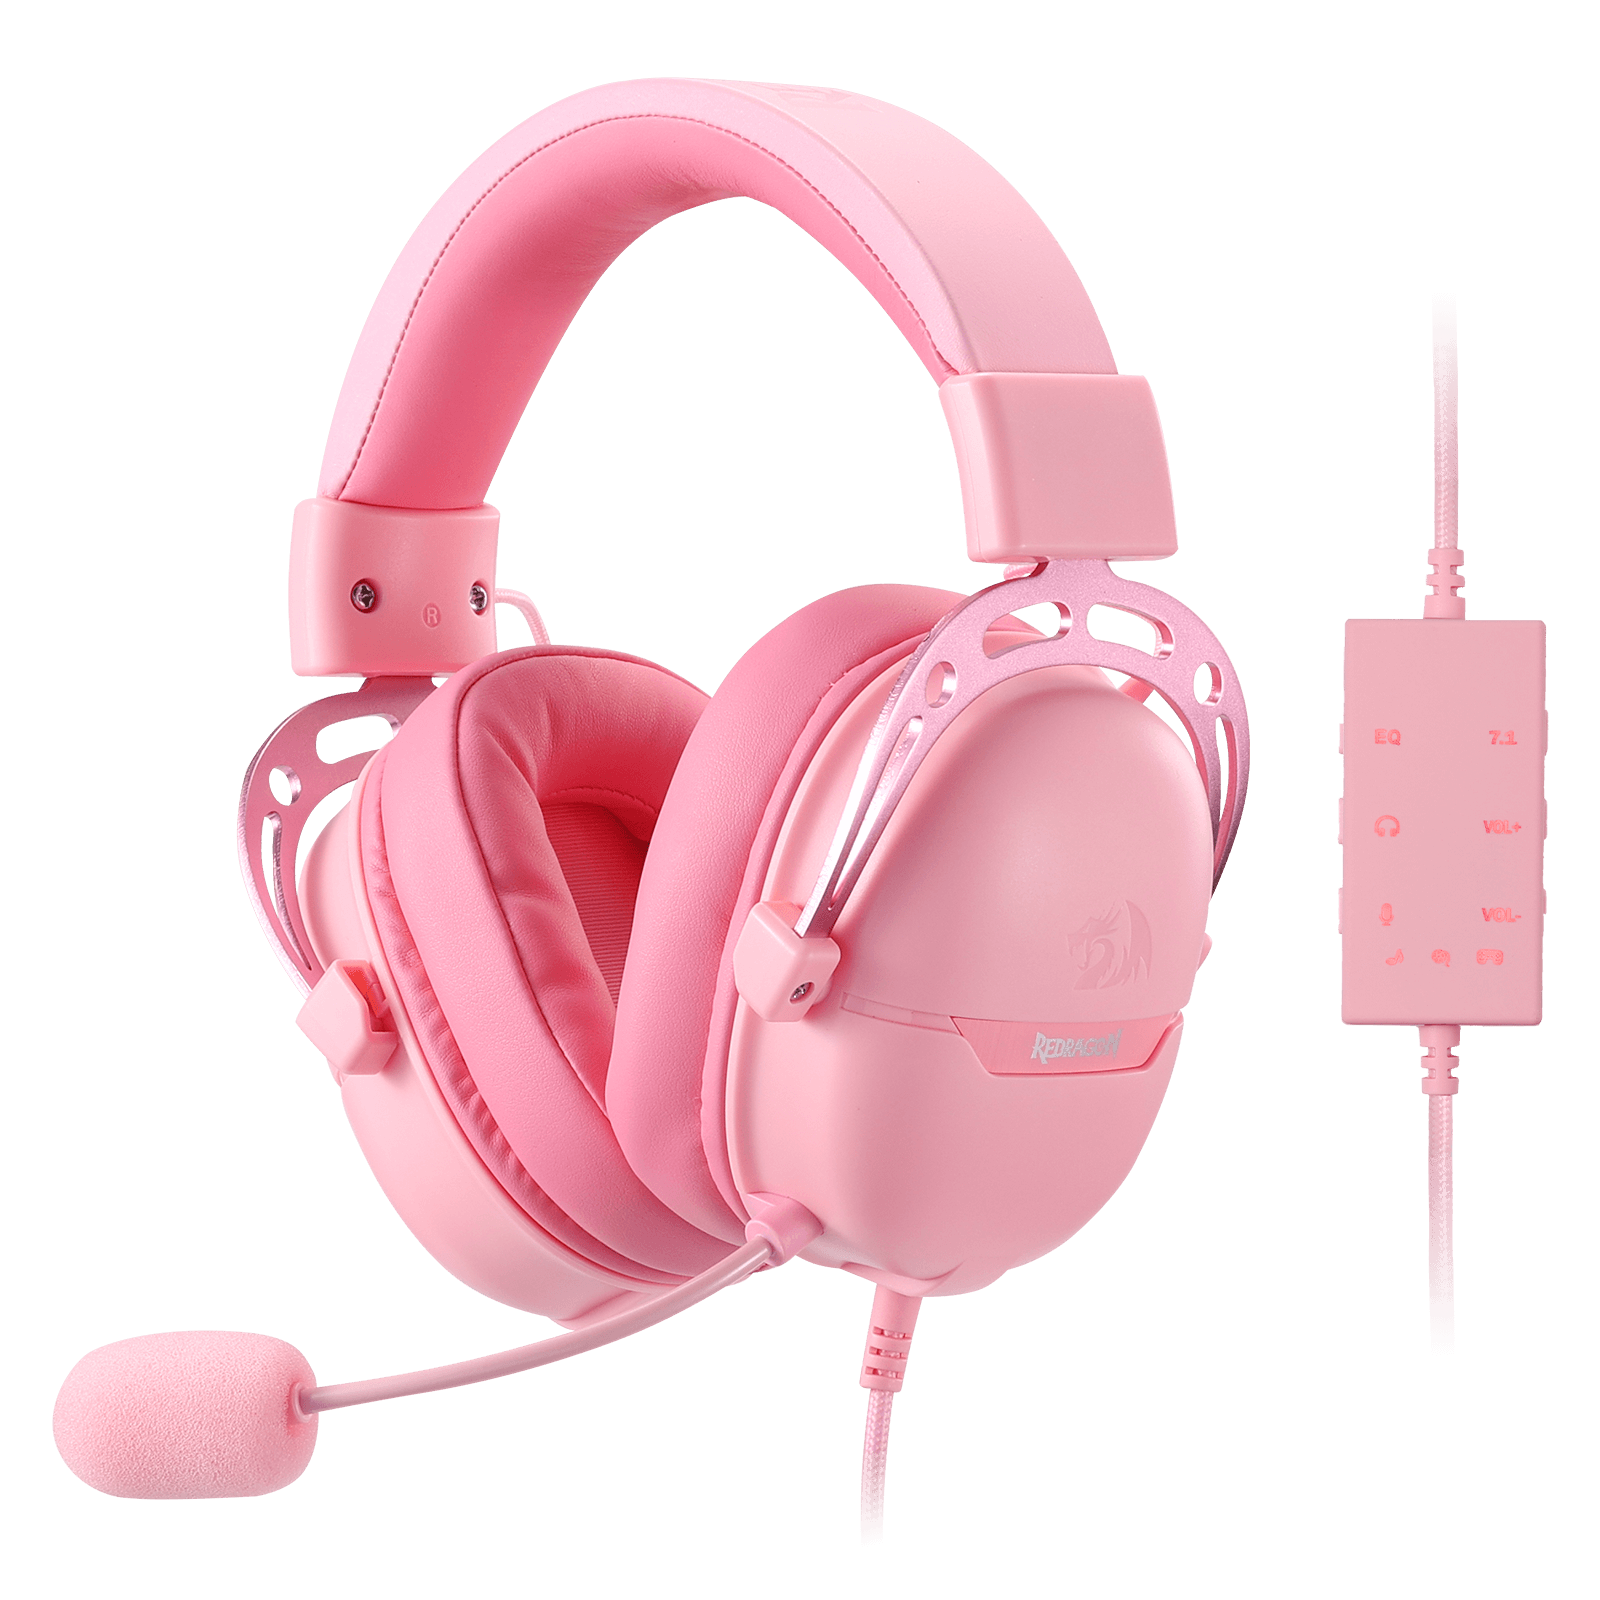 Redragon H376 Aurora Wired Gaming Headset, Virtual 7.1 Surround Sound, 40mm Drivers, in-line Control with EQ Mode, Over-Ear Headphones pink color Works for PC/PS5/NS | show